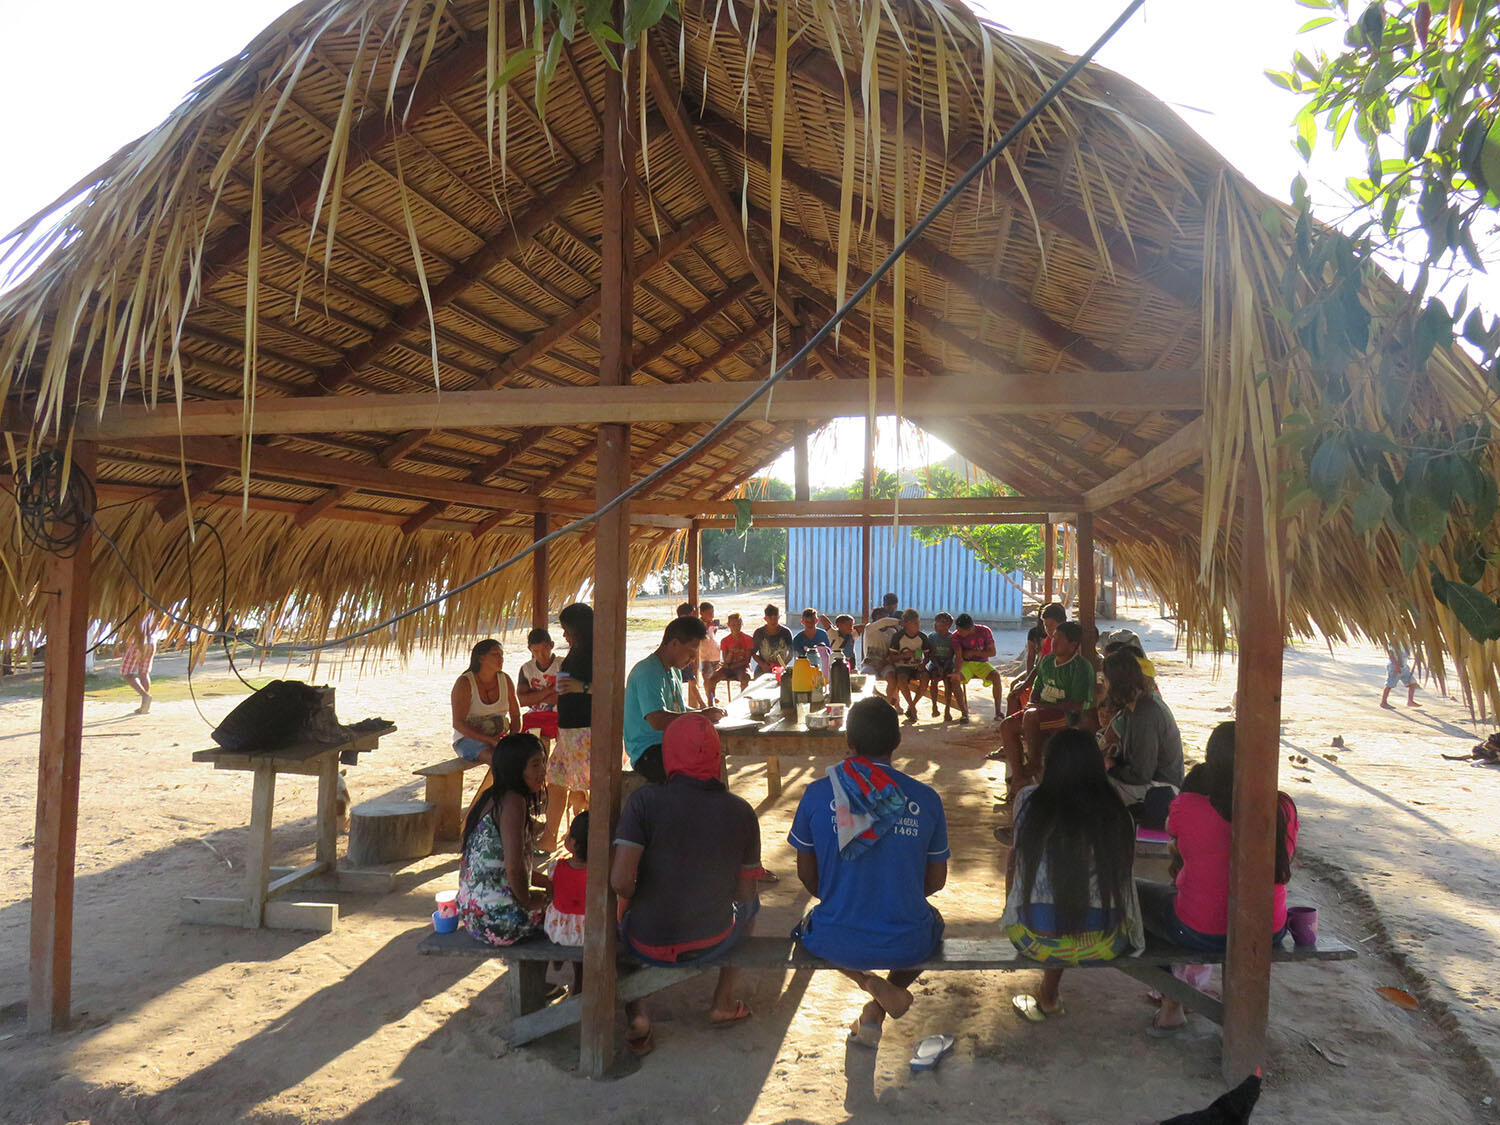 Village members in Nova Trairão gather for a meal. (Photo courtesy of Rosamaria Loures.)